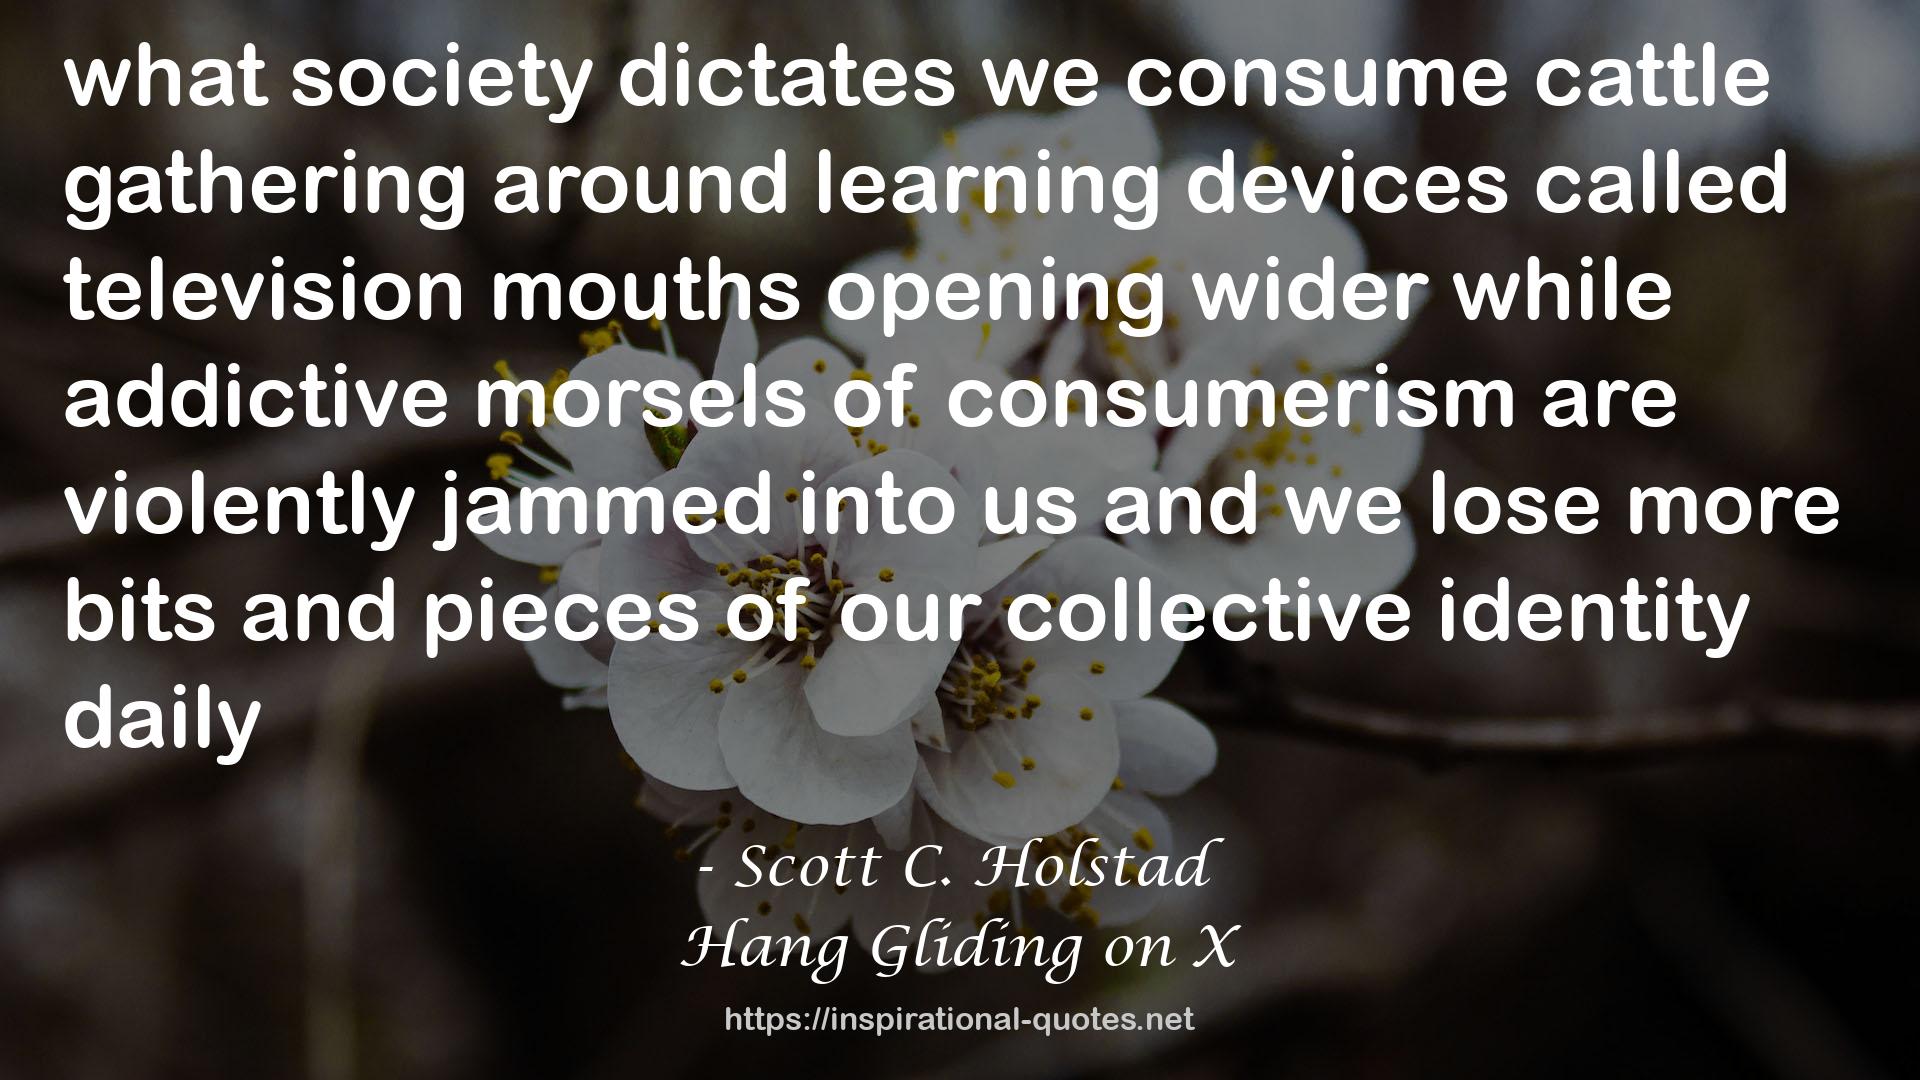 Scott C. Holstad quote : what society dictates<br />we consume<br />cattle gathering around<br />learning devices called<br />television<br />mouths opening wider<br />while addictive morsels<br />of consumerism are<br />violently jammed into<br />us<br />and we lose more<br />bits and pieces<br />of our collective identity<br />daily